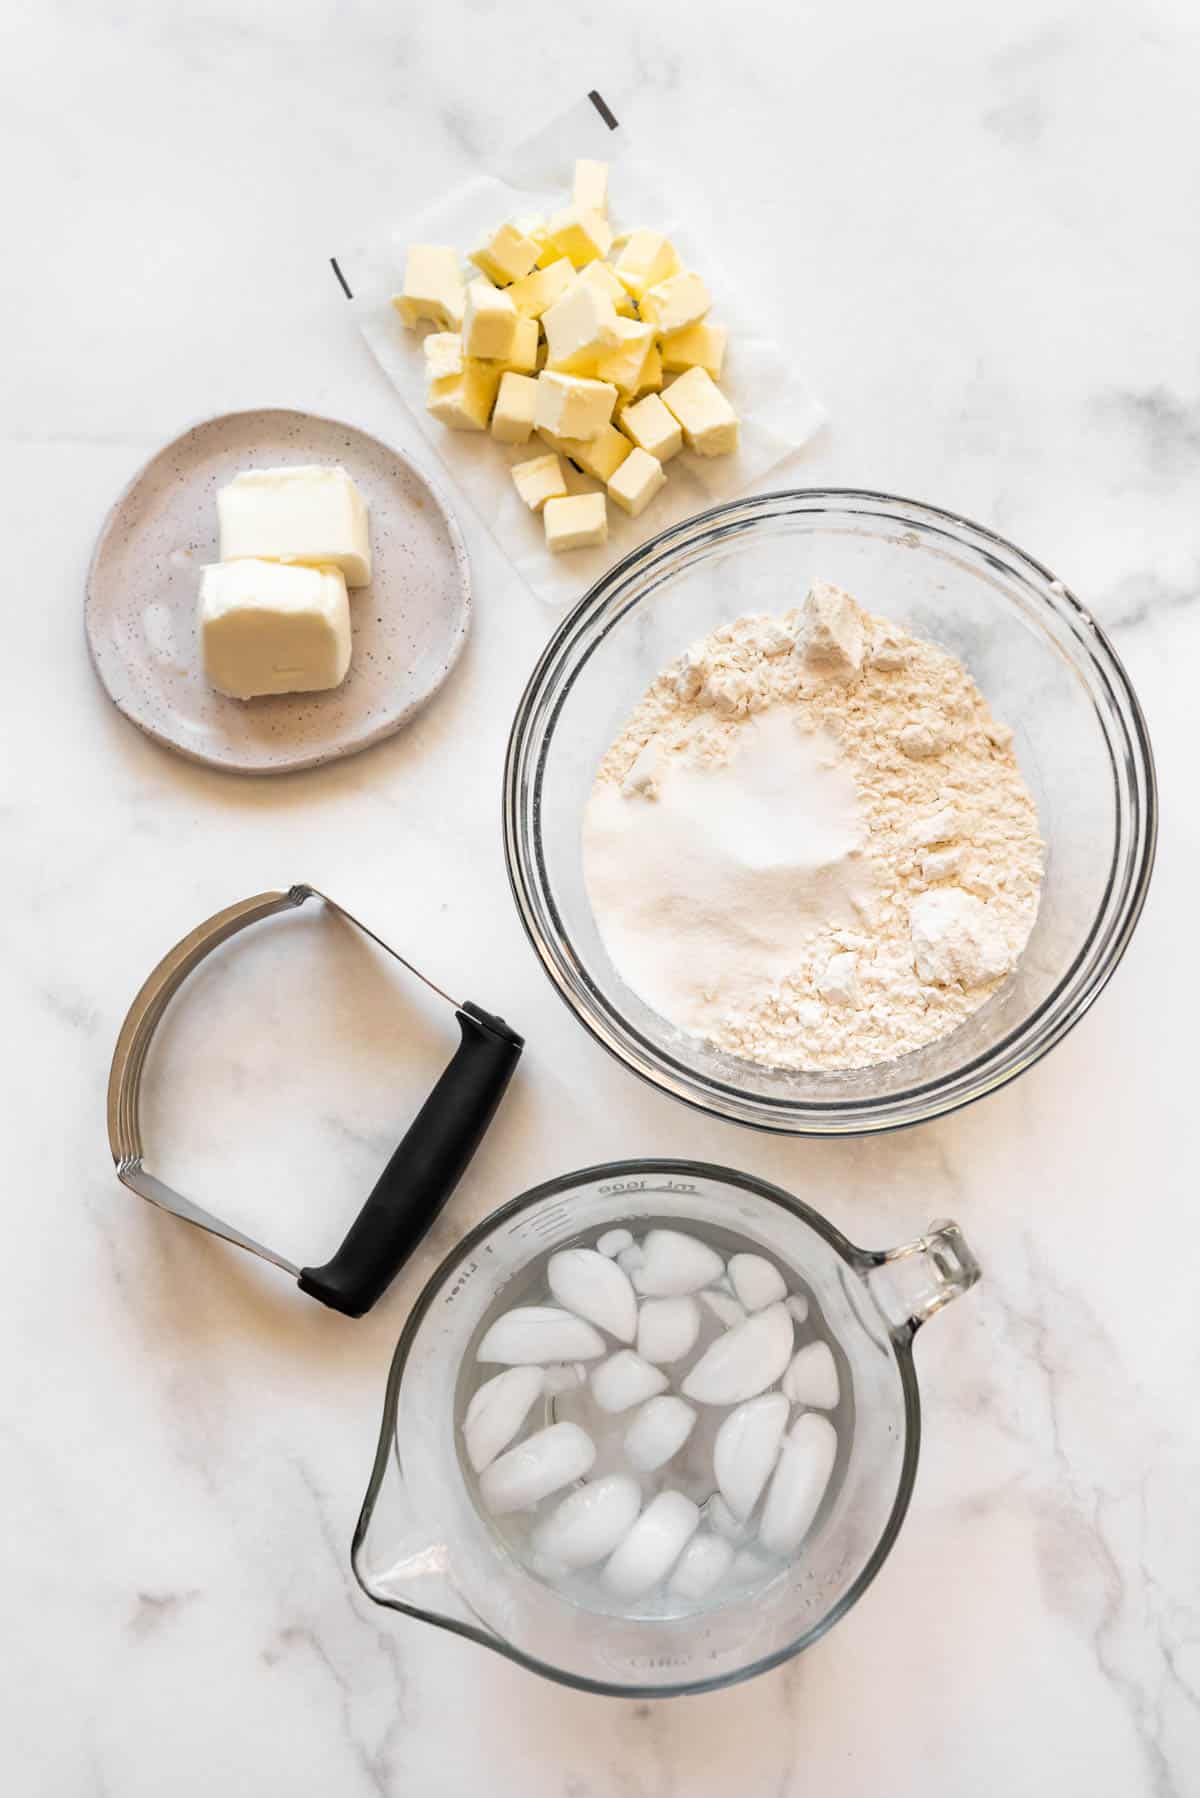 Ingredients for making homemade pie crust.